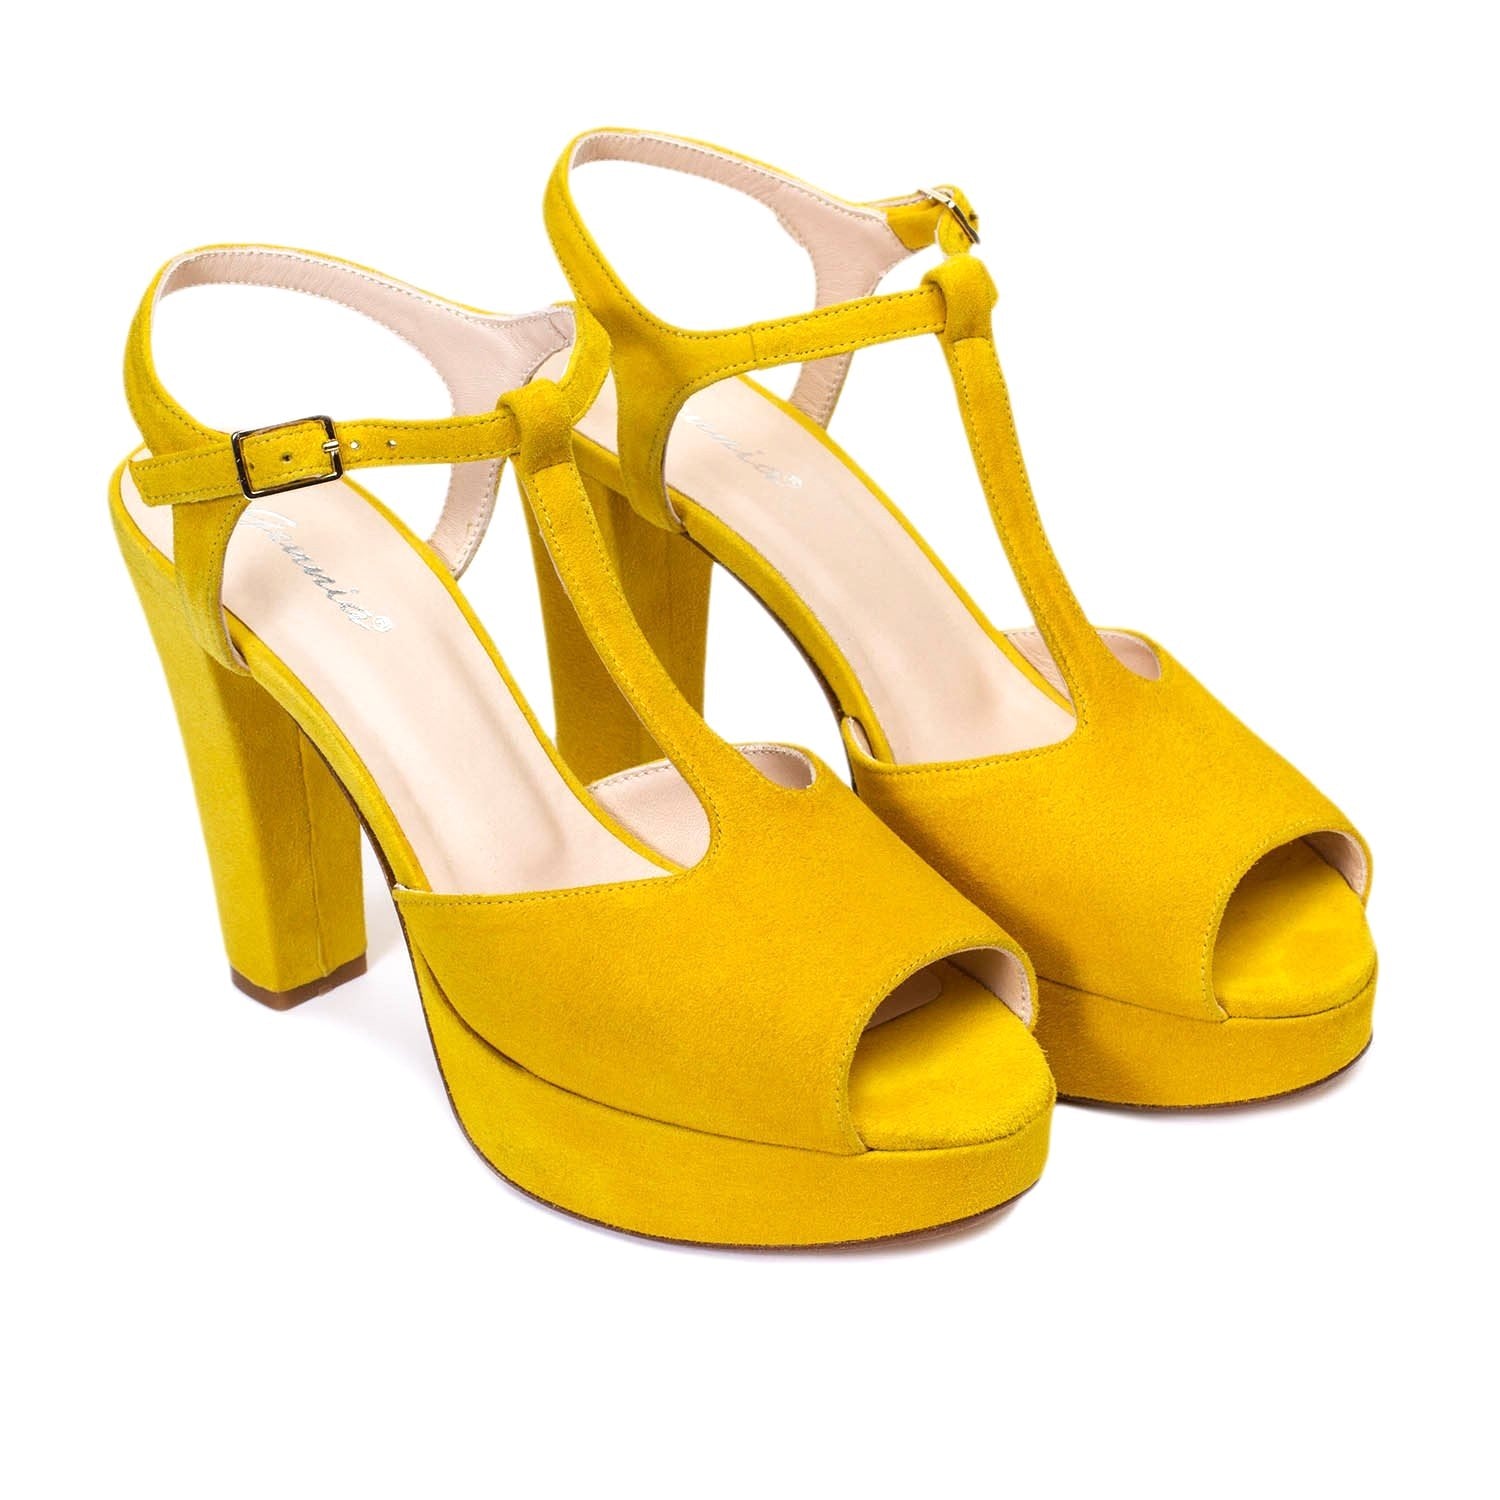 IRIS Yellow Leather Suede